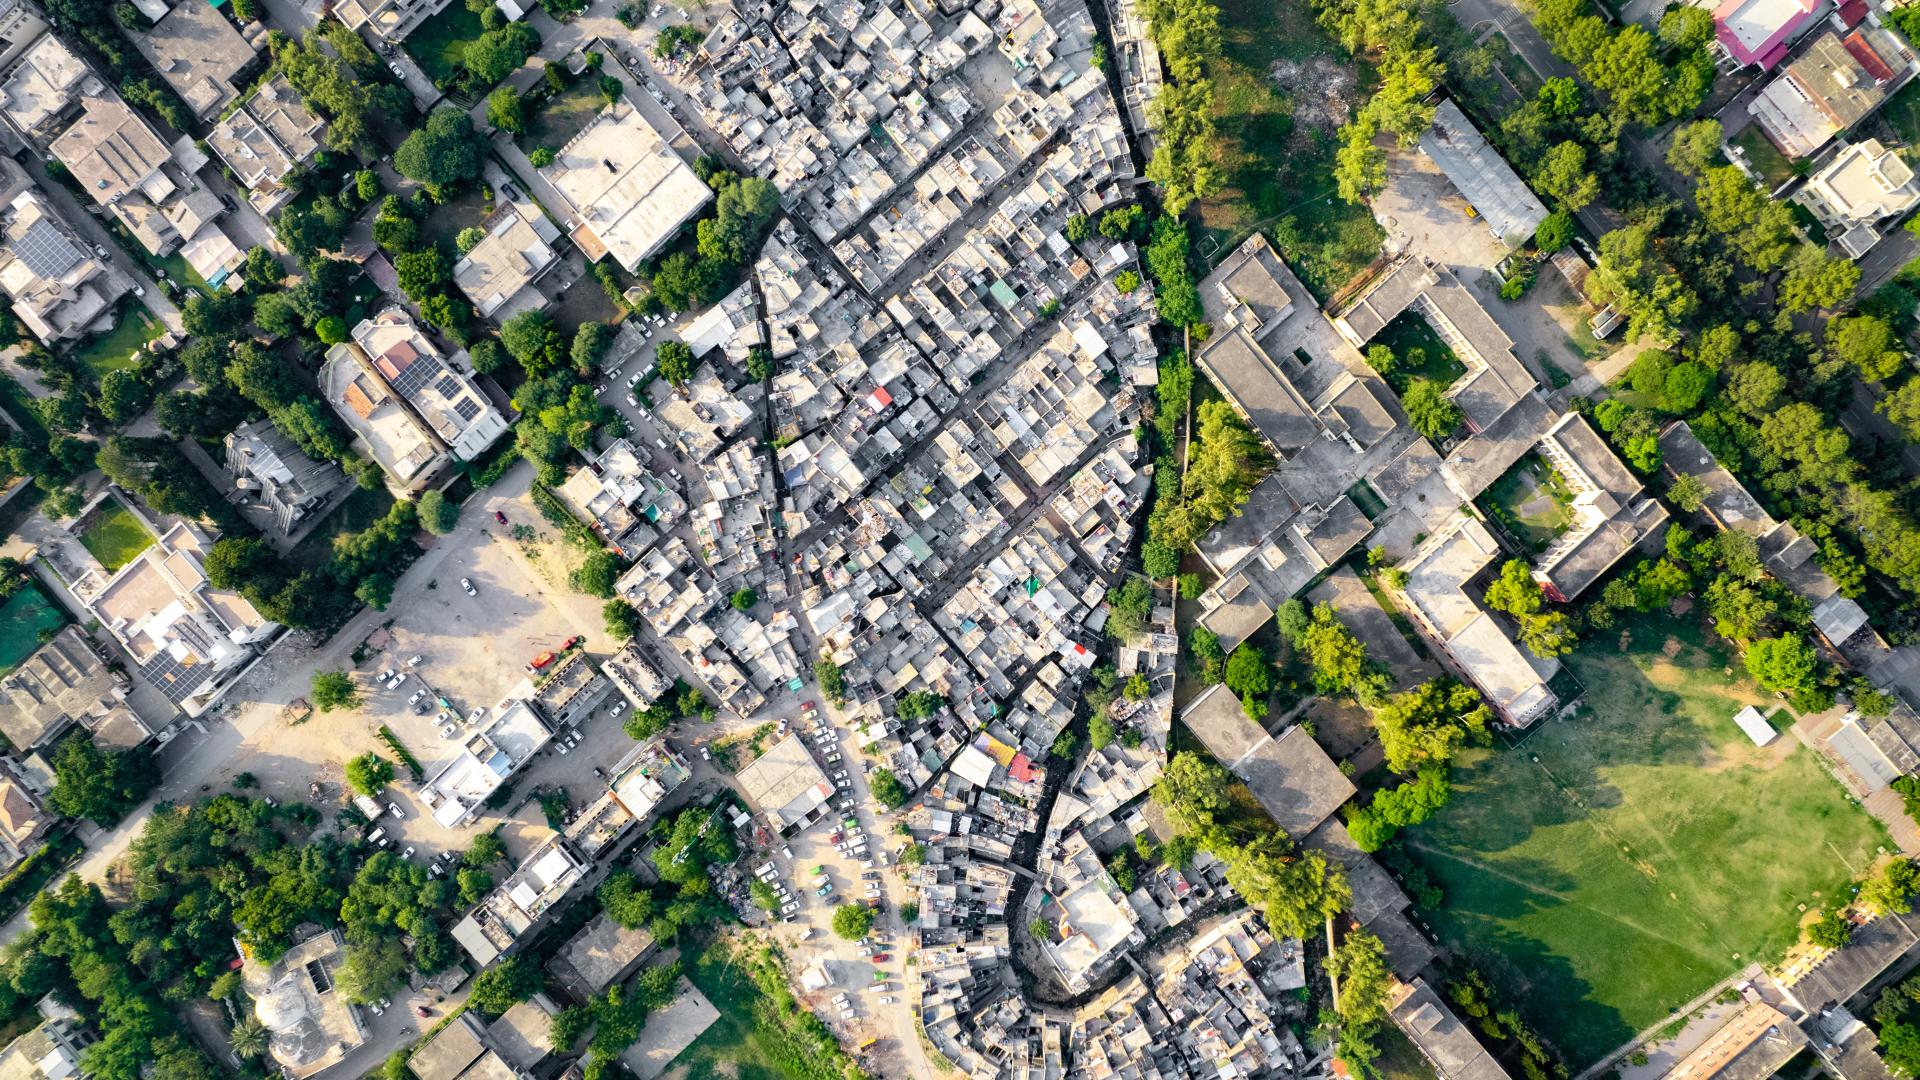 Aerial view of cluster of small houses surrounded by large concrete buildings and greenery